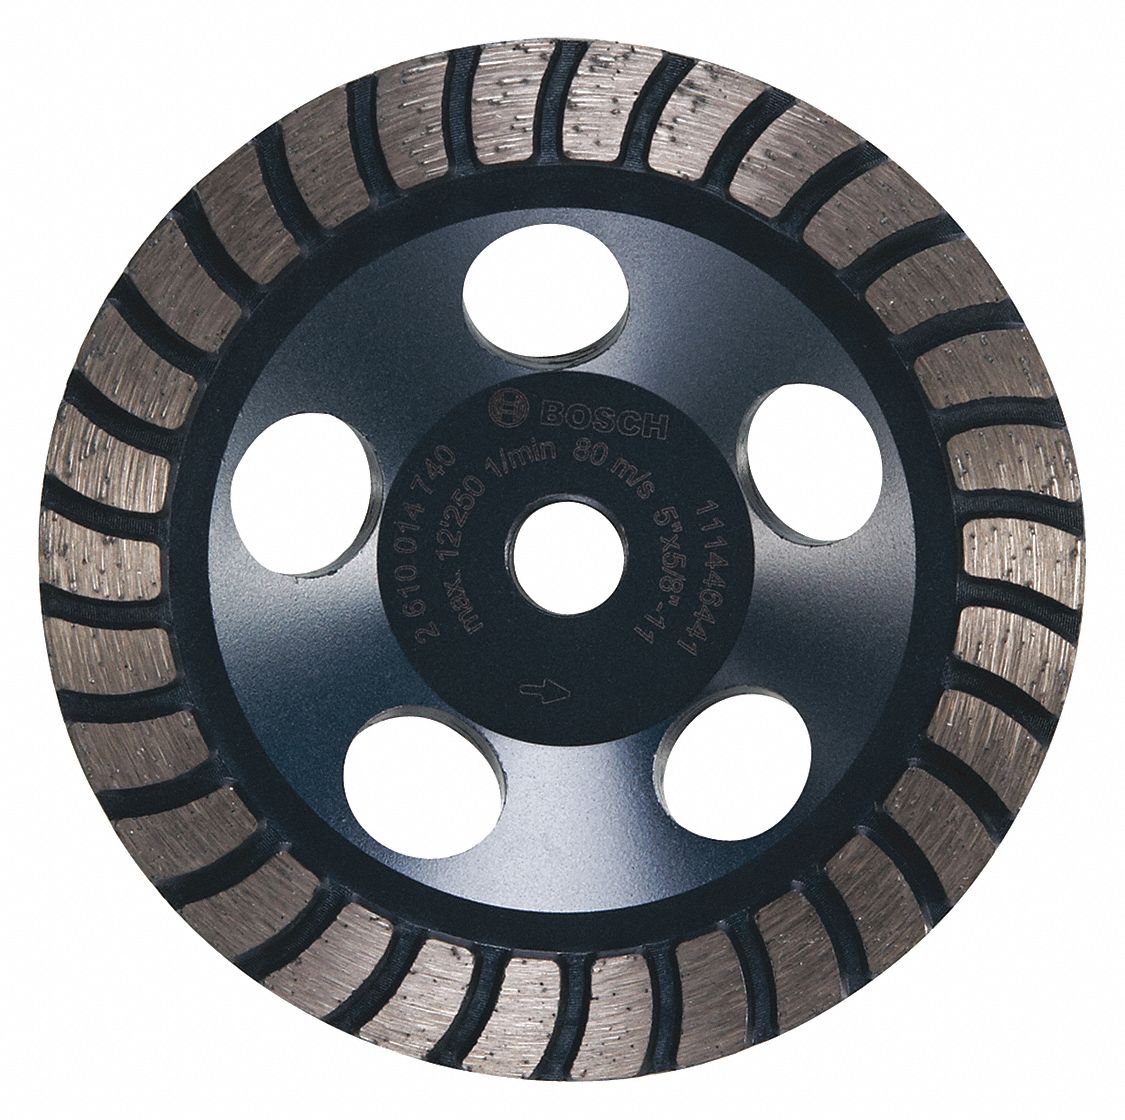 44M791 - 5In Turbo Row Diamond Cup Wheel - Only Shipped in Quantities of 3